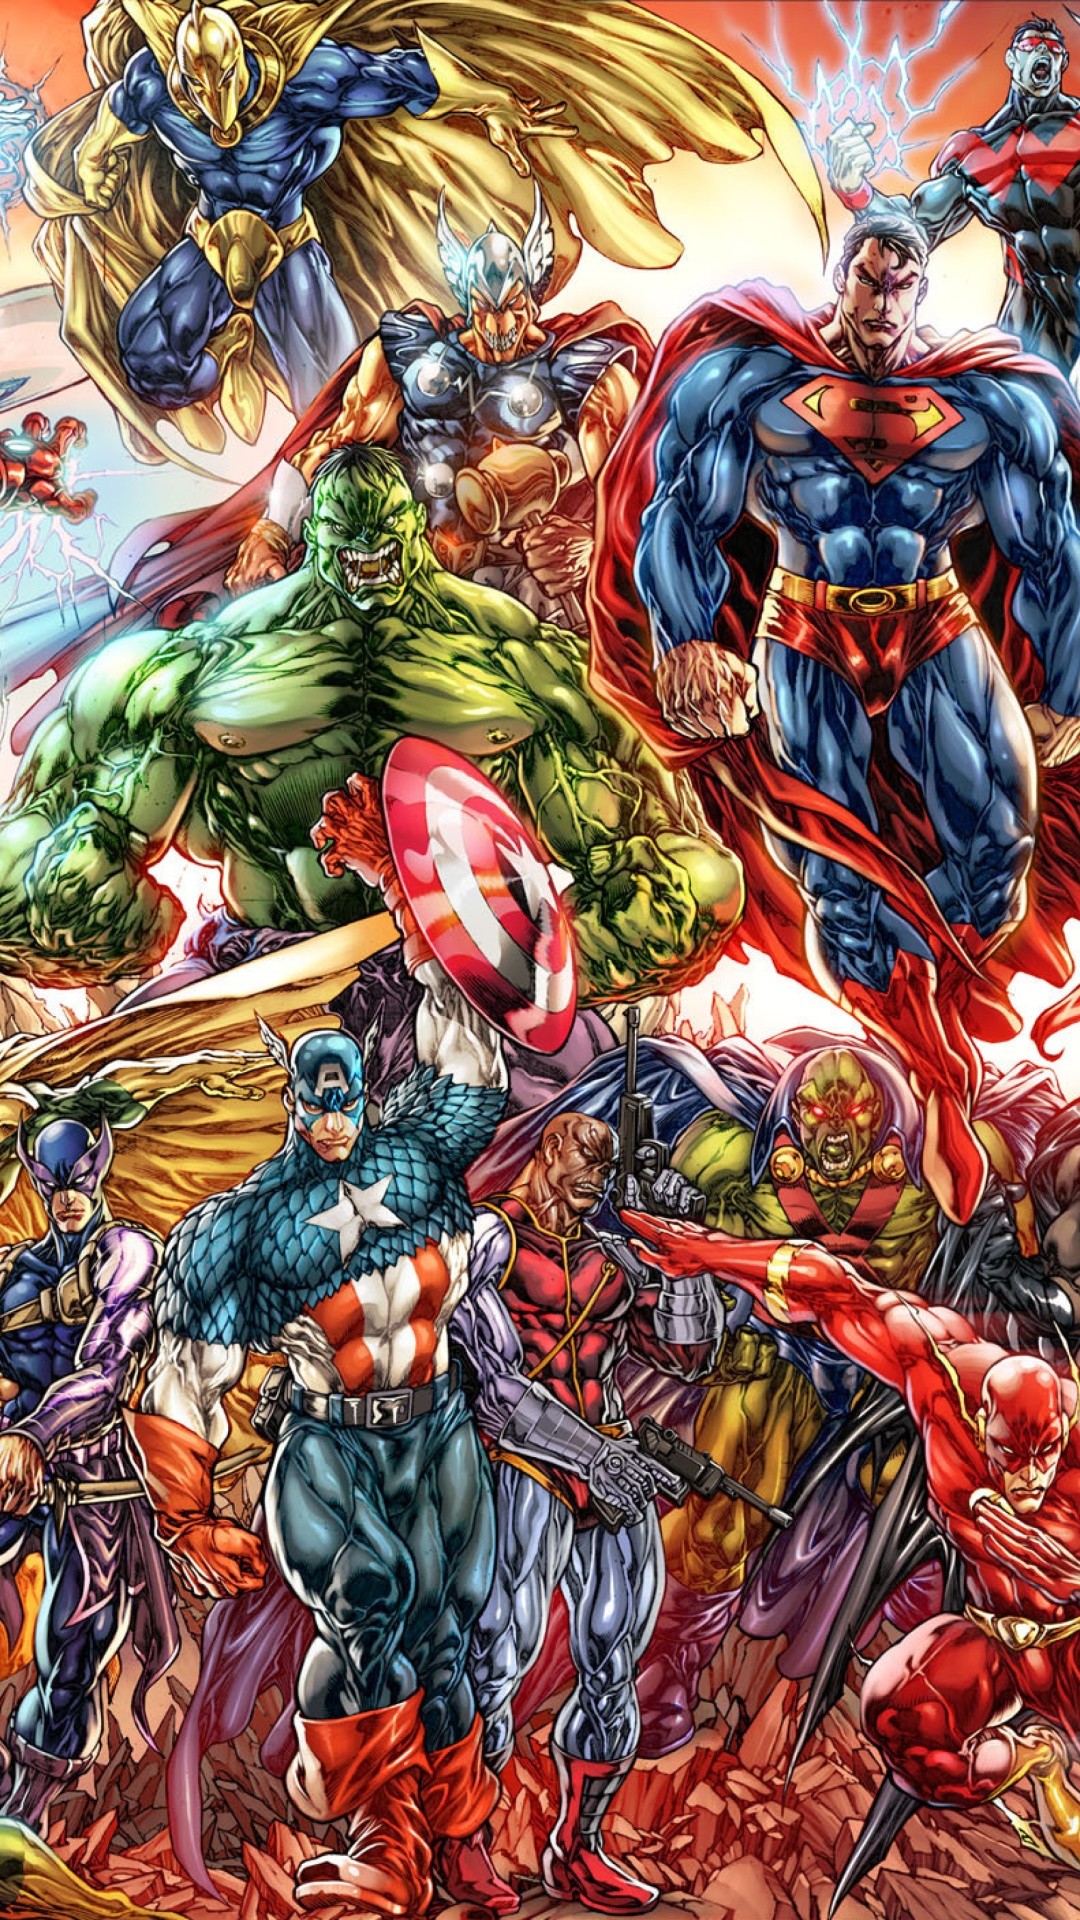 1080x1920 Marvel Iphone Wallpaper – Marvel Wallpaper for Iphone Free Download